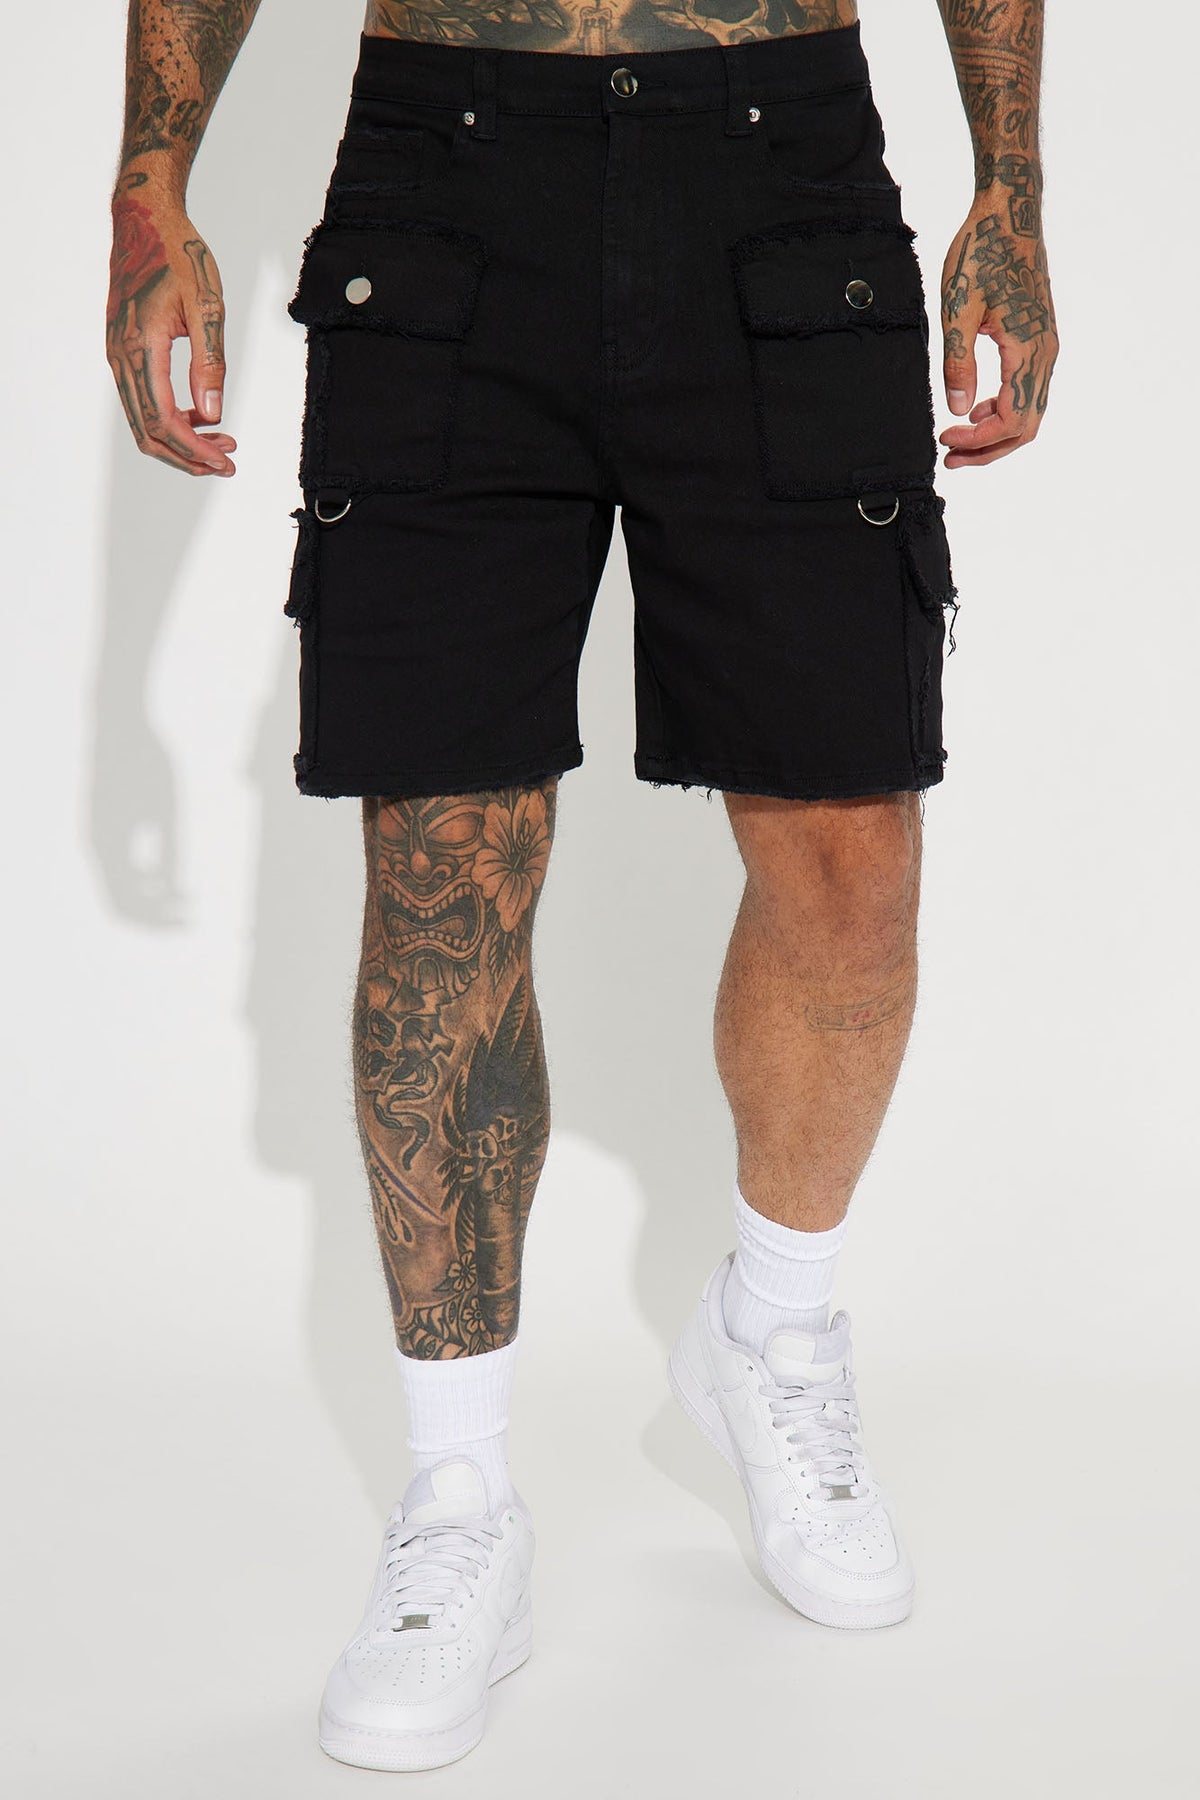 More Than Two Twill Cargo Shorts - Black